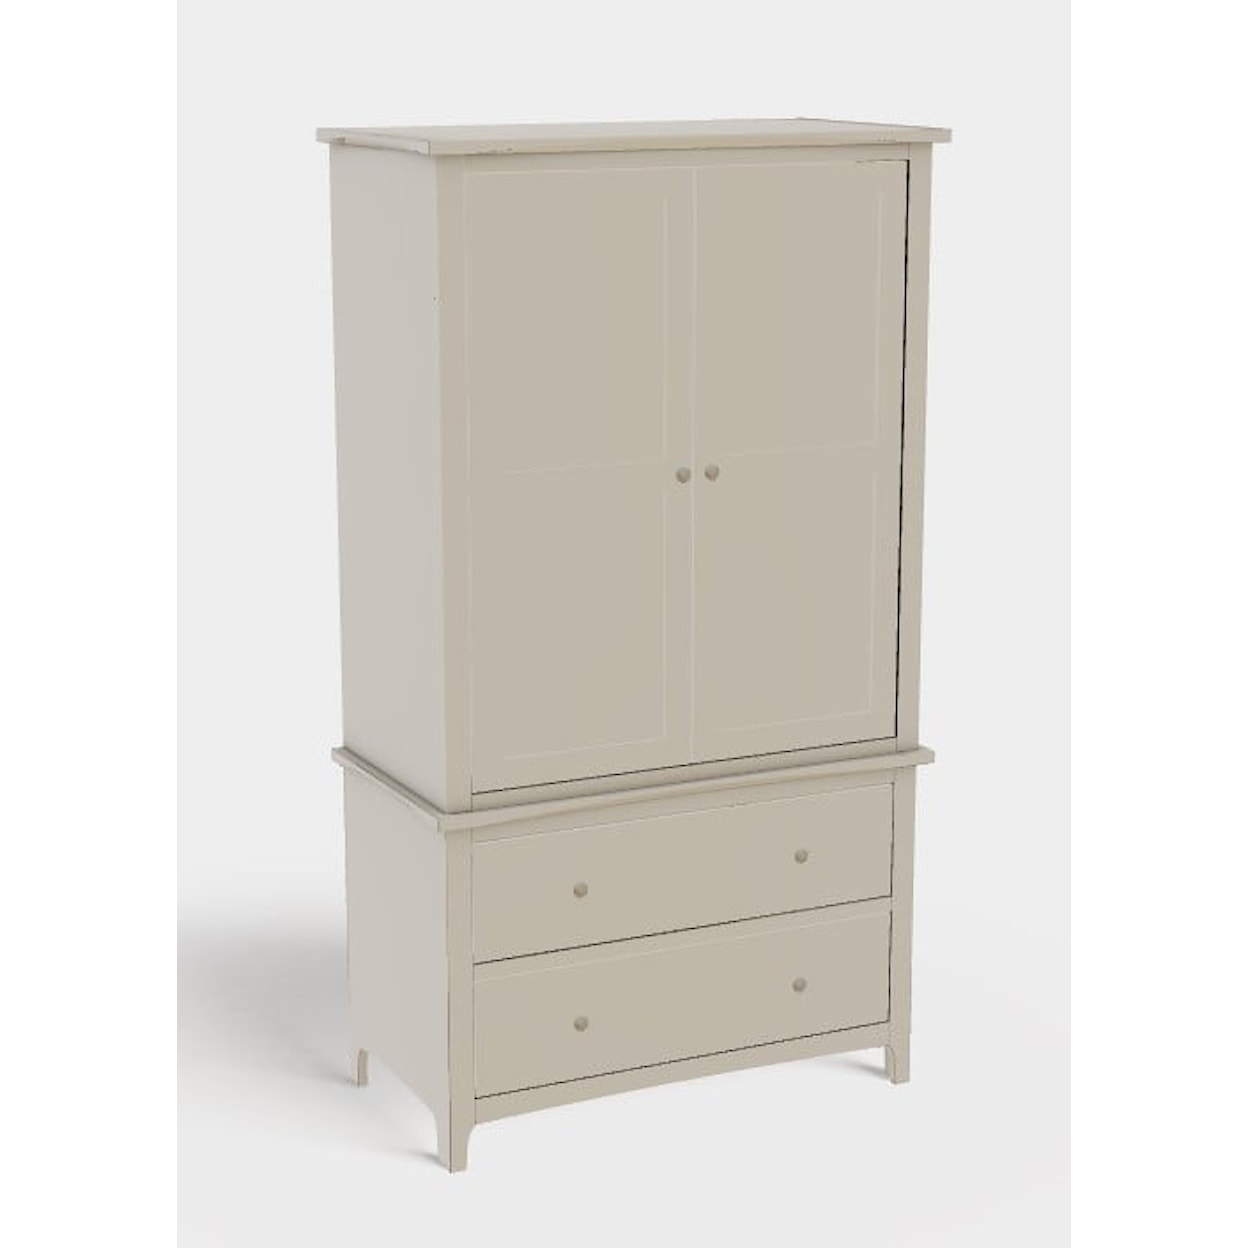 Mavin Atwood Group Atwood Armoire 1